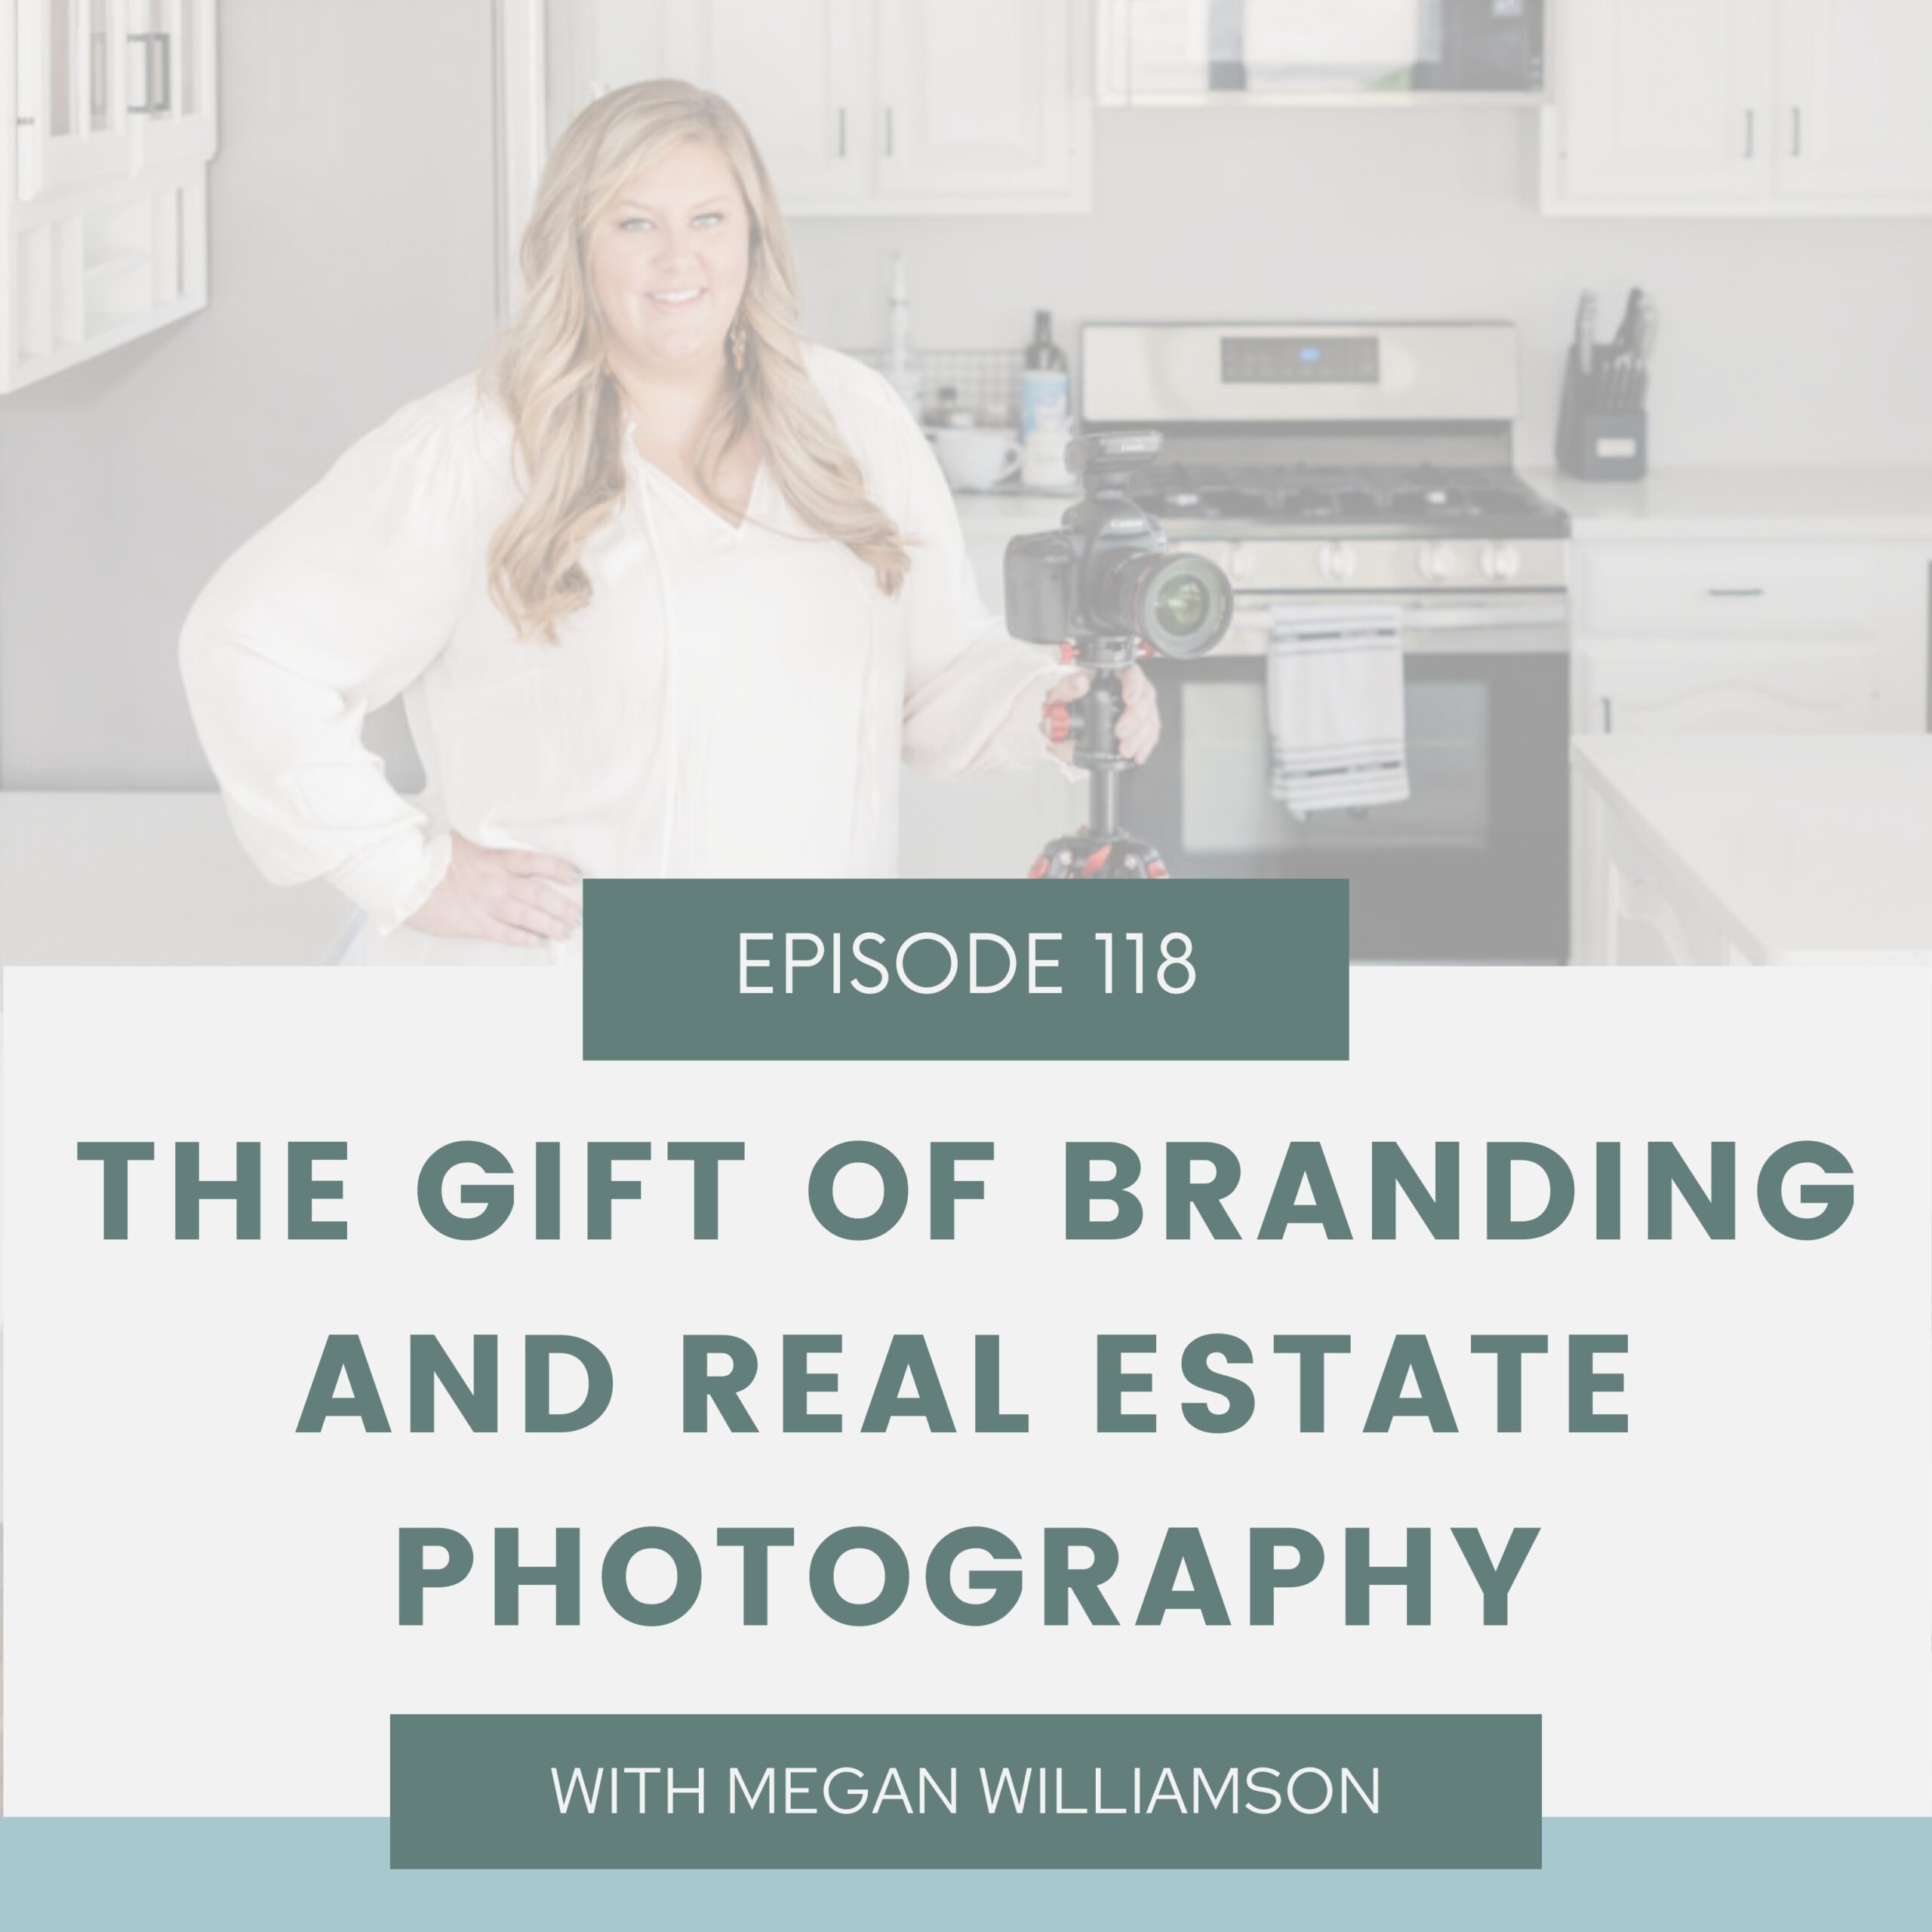 Real Estate and Branding Photography Coach